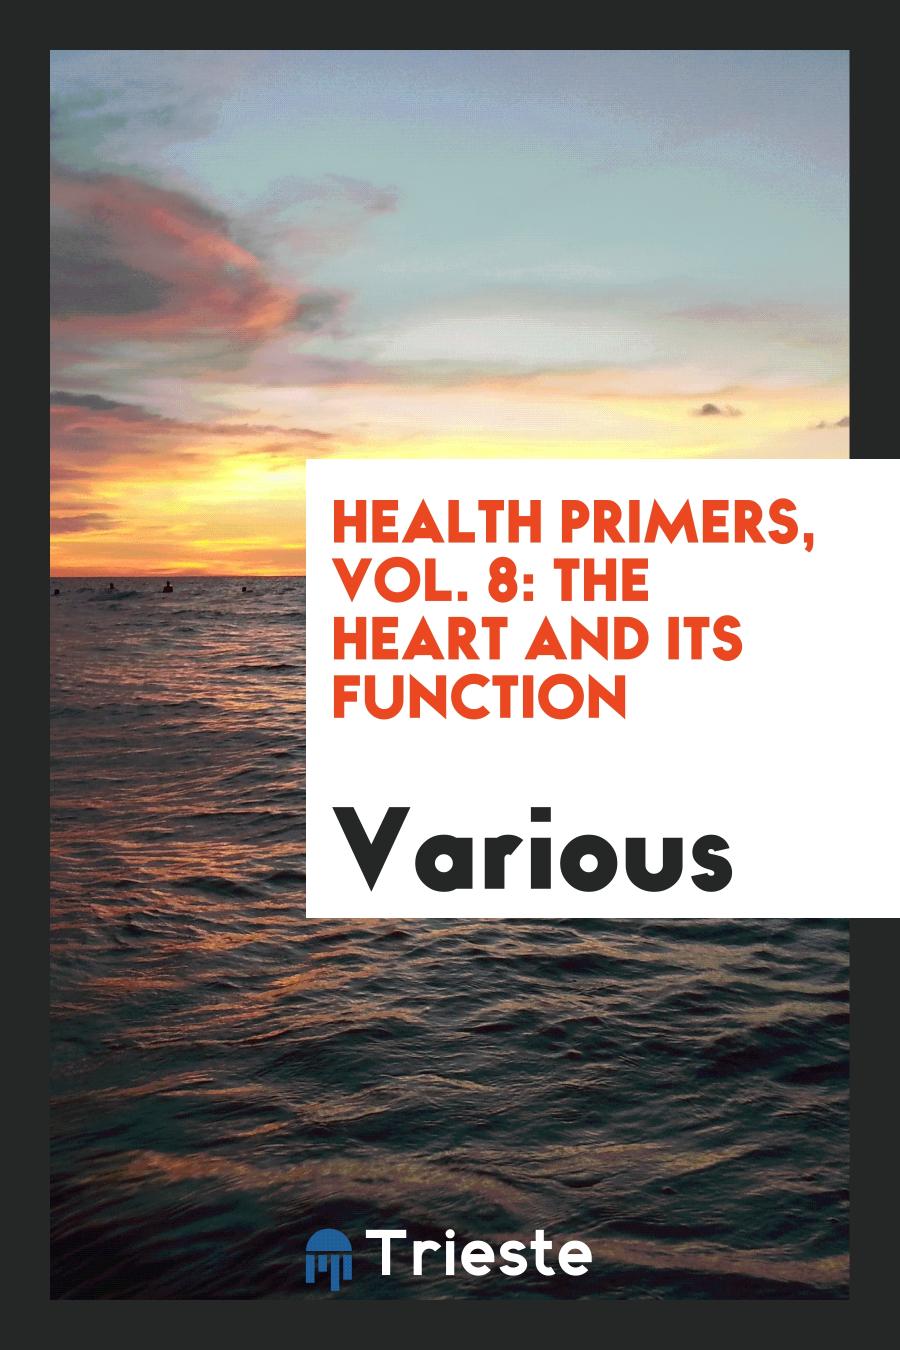 Health Primers, Vol. 8: The Heart and Its Function